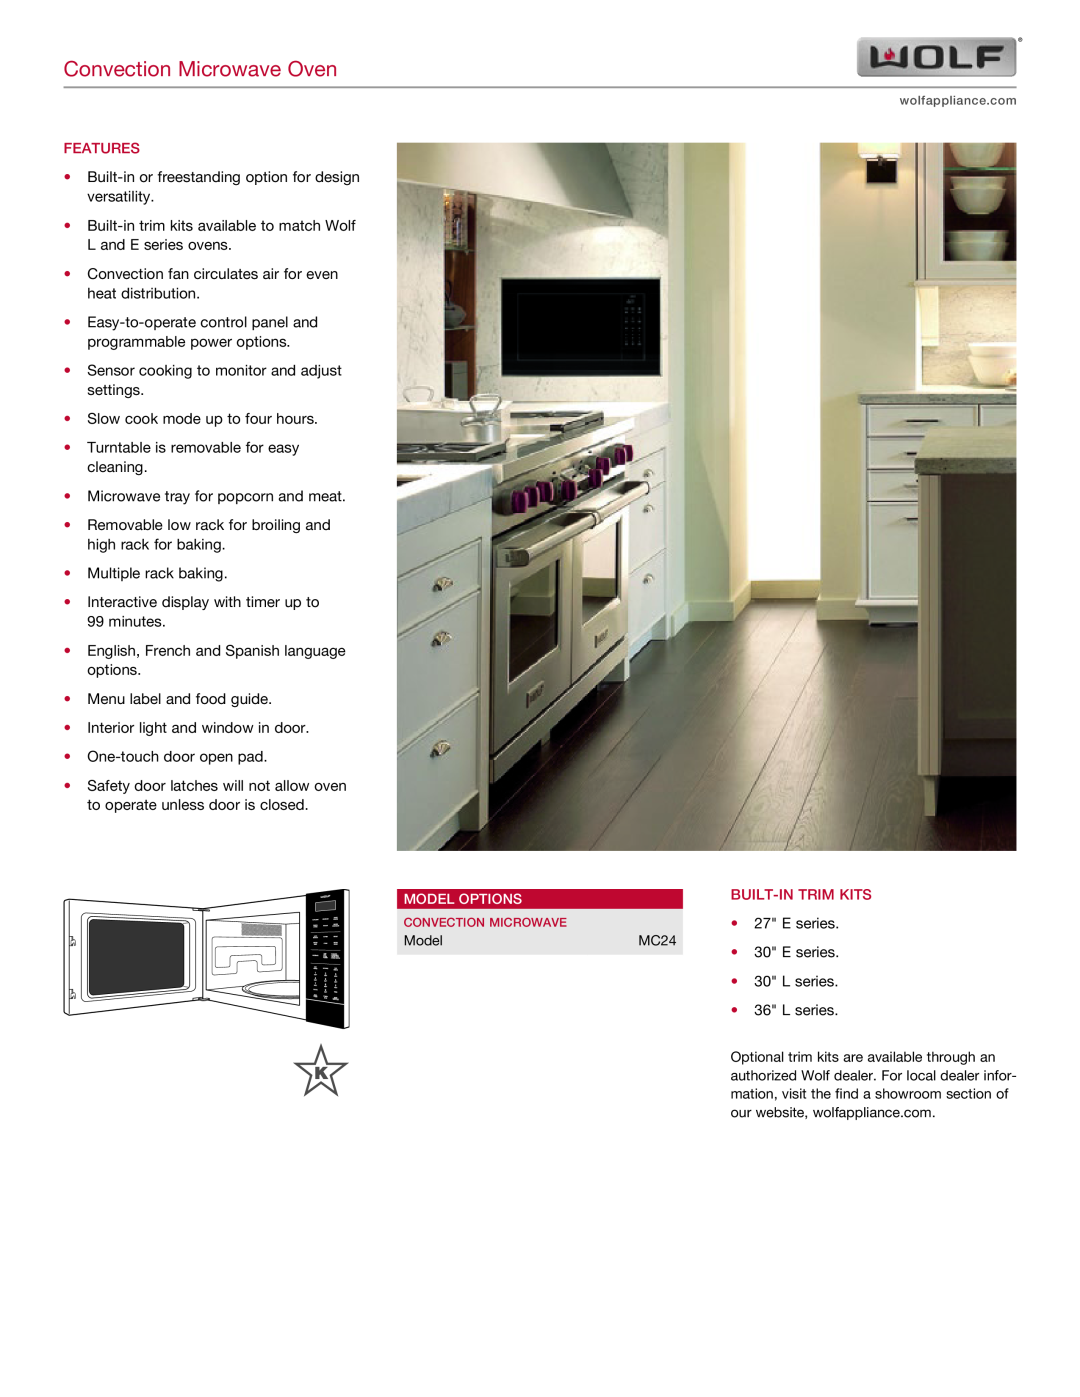 Wolf Appliance Company 30" E SERIES manual Convection Microwave Oven, Model Options, Features, Built-Intrim Kits, E series 